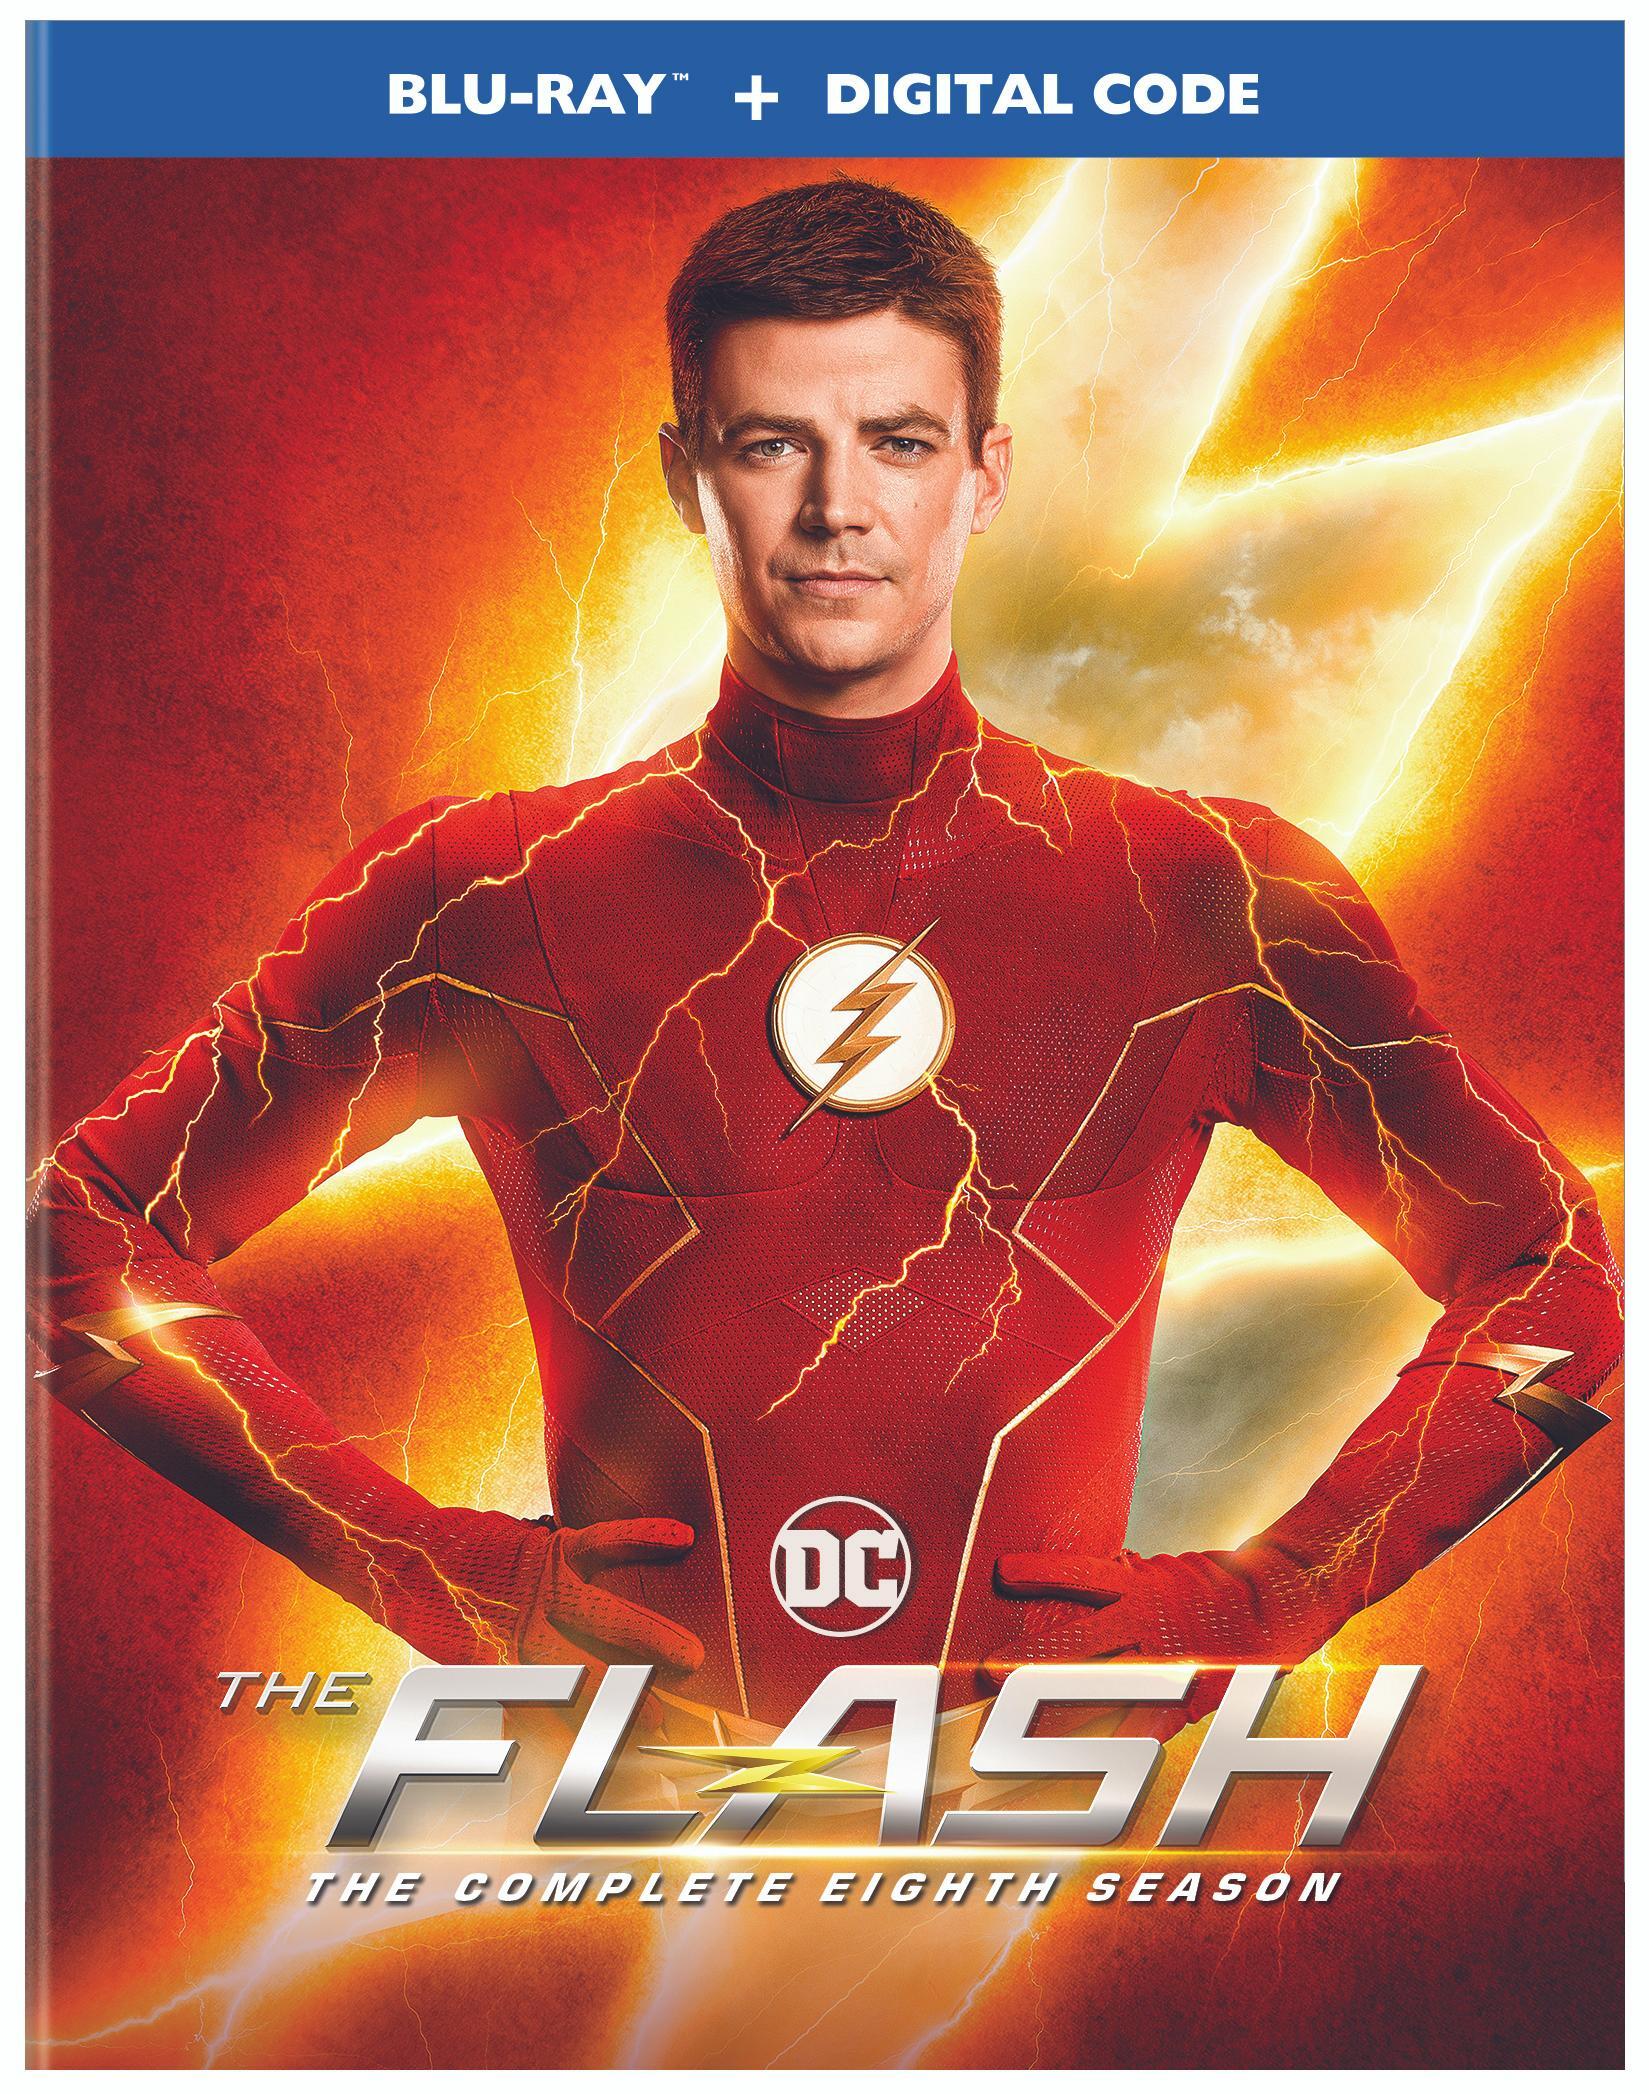 The Flash: The Complete Eighth Season (Box Set) - Blu-ray [ 2022 ]  - Drama Television On Blu-ray - TV Shows On GRUV